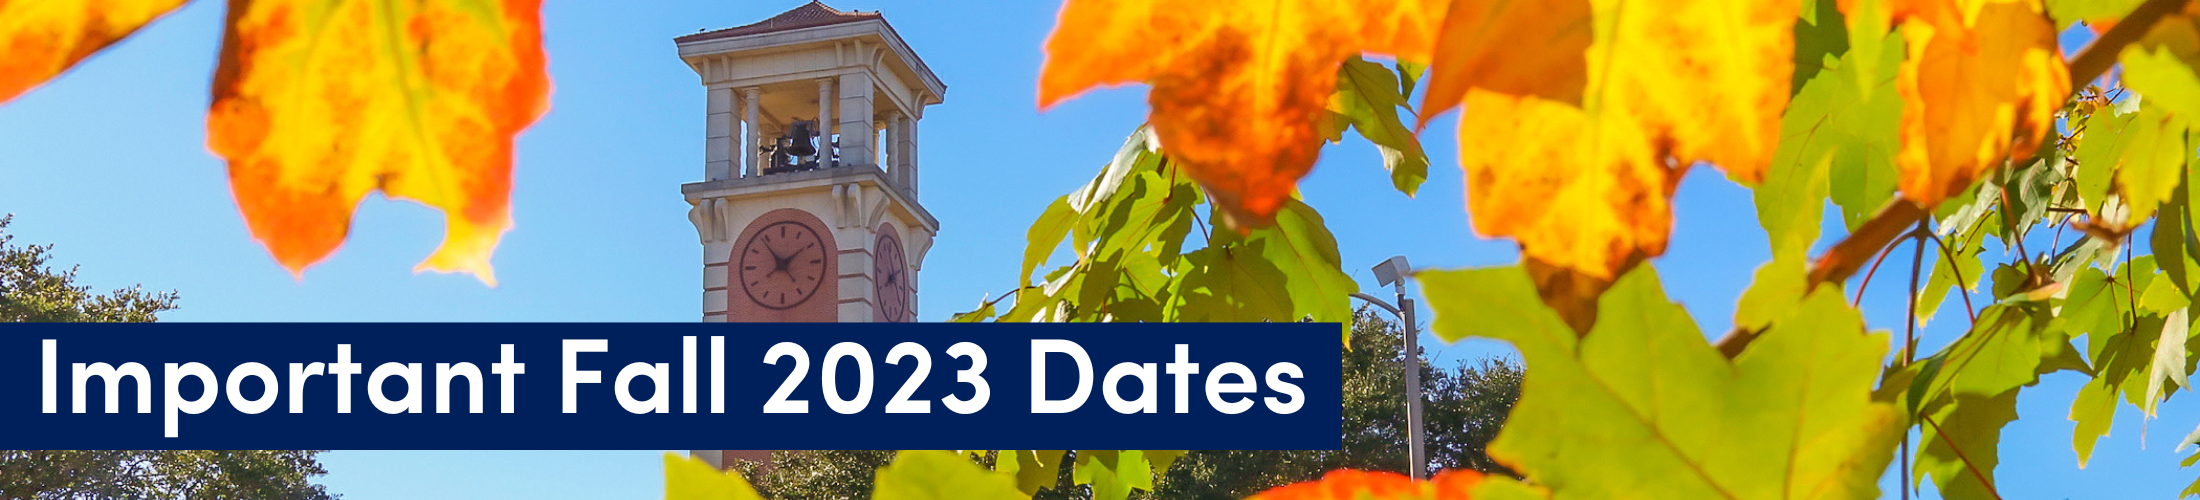 Important Fall 2023 Dates